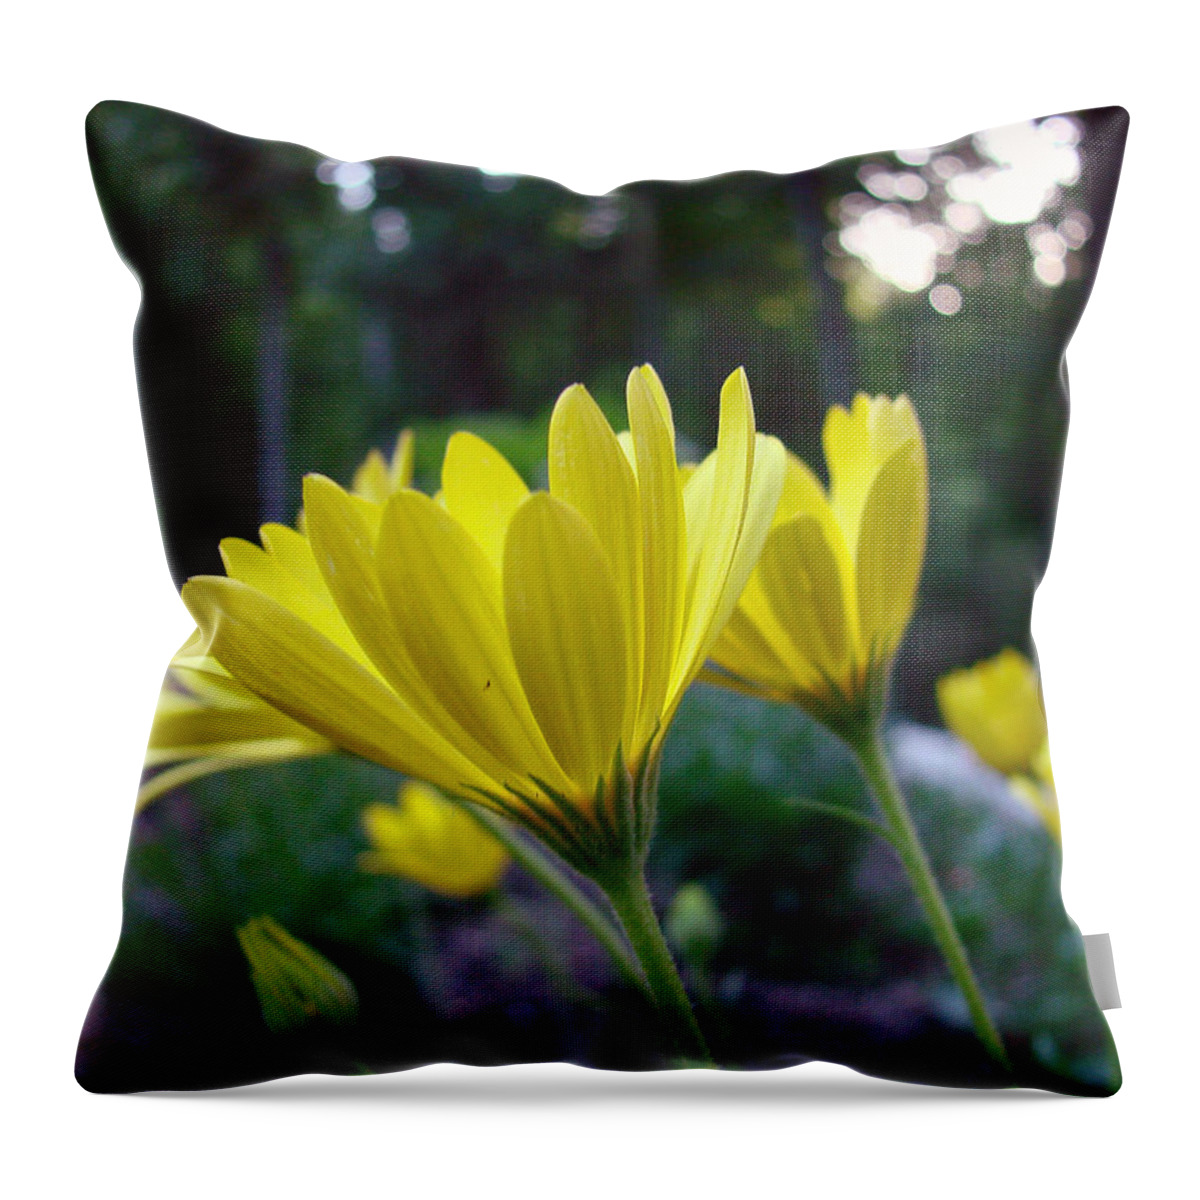 Yellow Flowers Throw Pillow featuring the photograph Yellow African Daisy by Mary Halpin